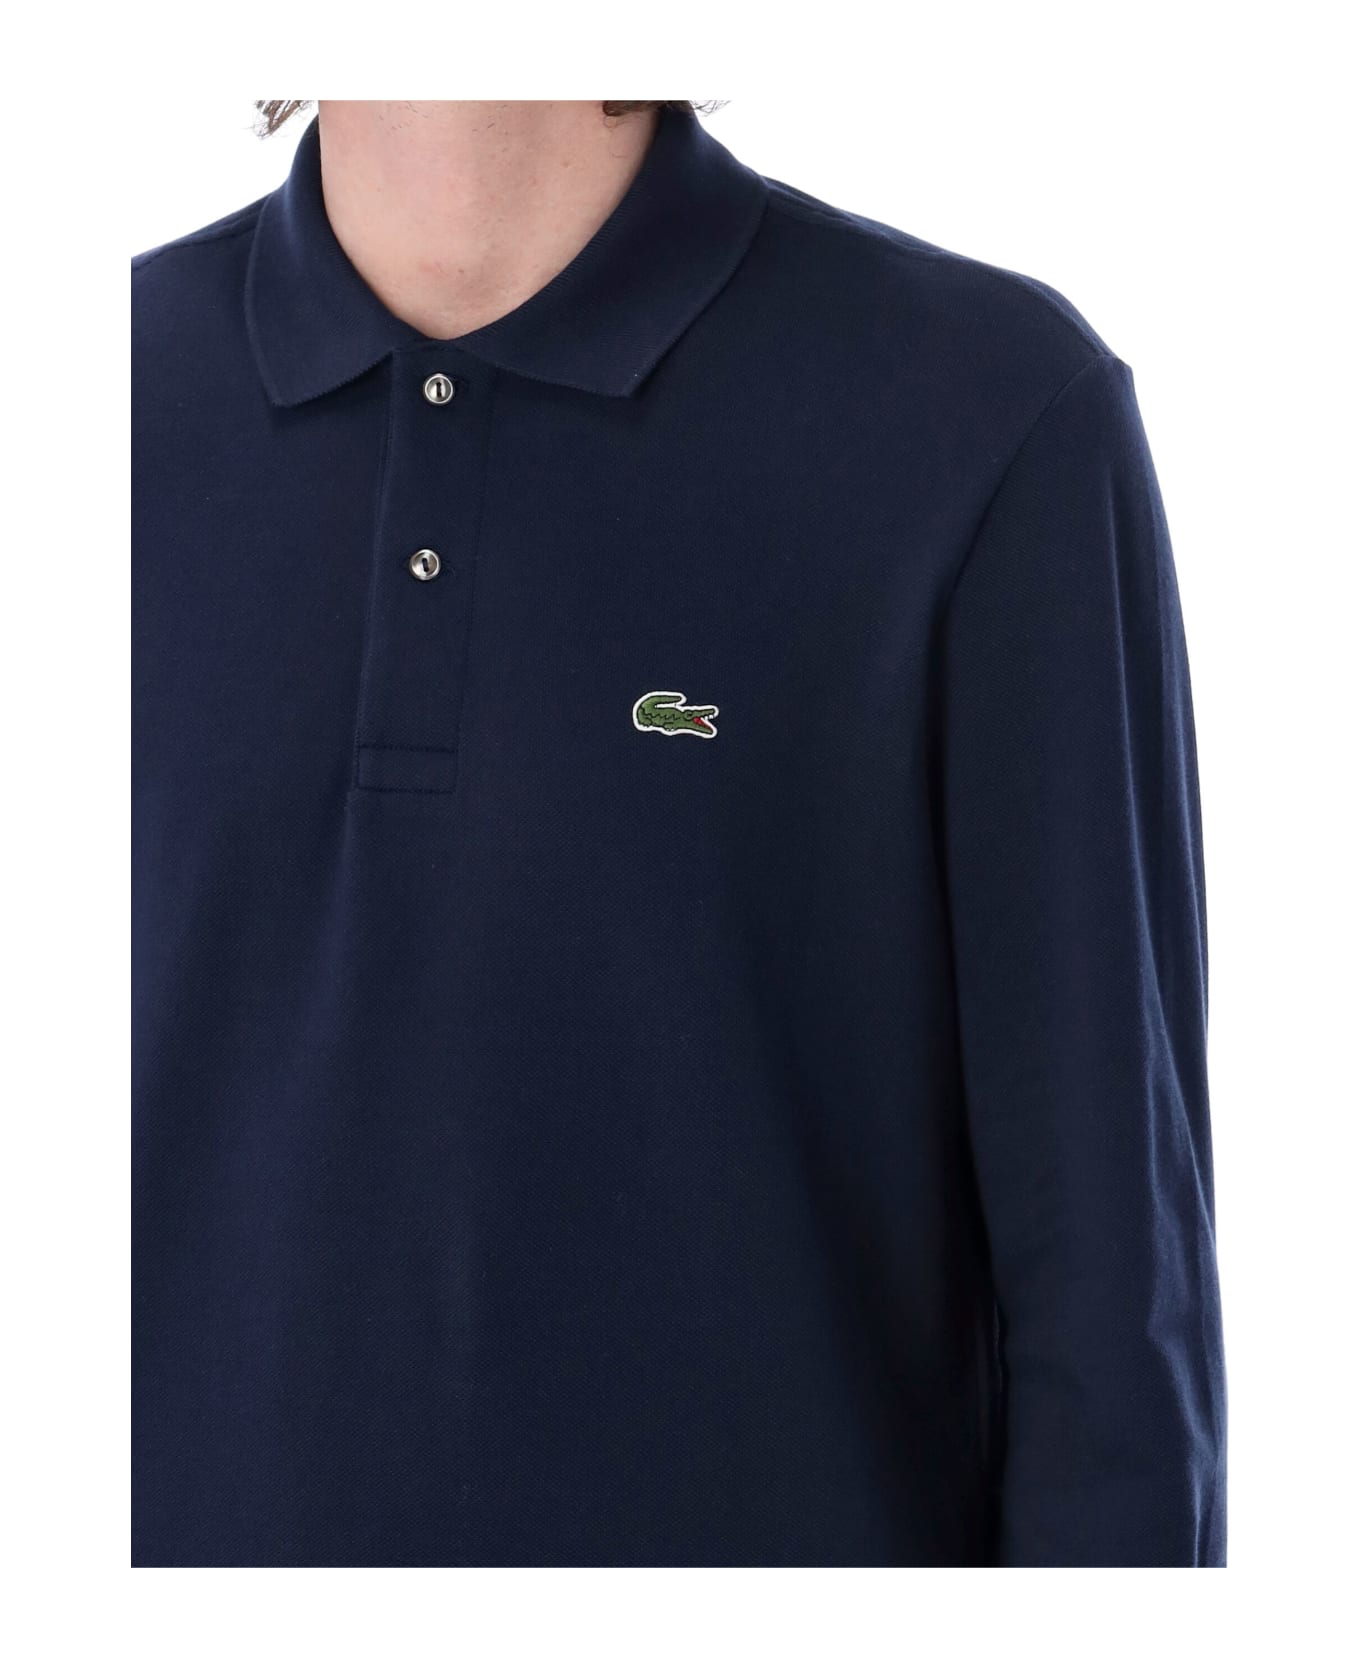 Lacoste Classic Fit L/s Polo Shirt - MARINE